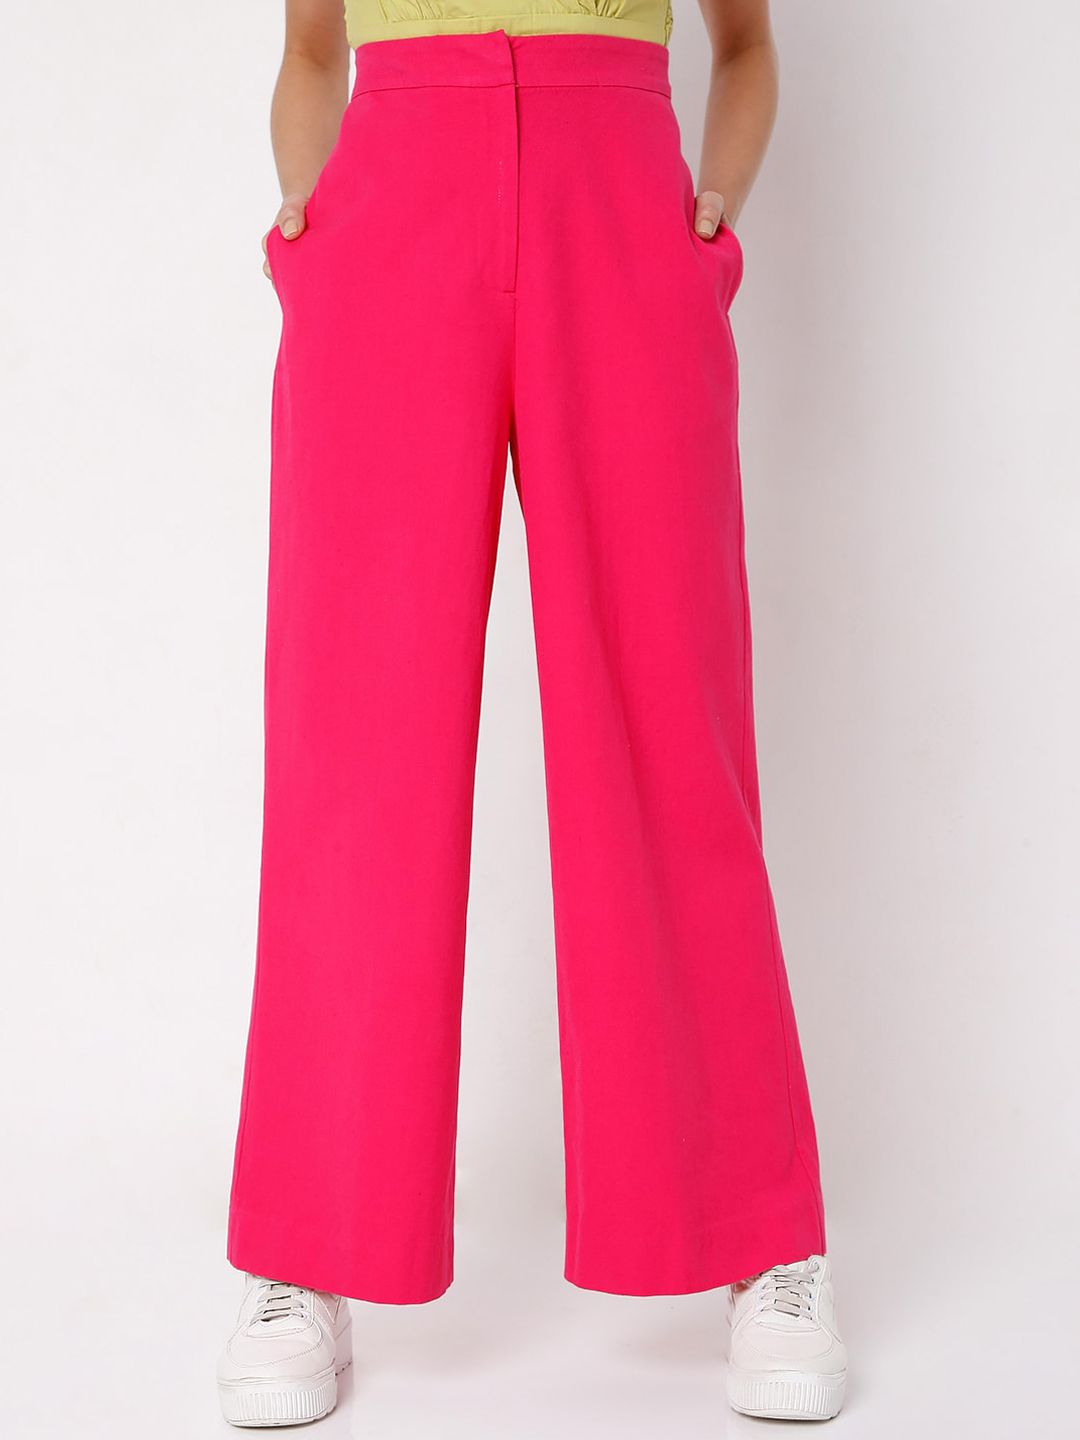 Vero Moda Women Pink Flared High-Rise Joggers Trousers Price in India